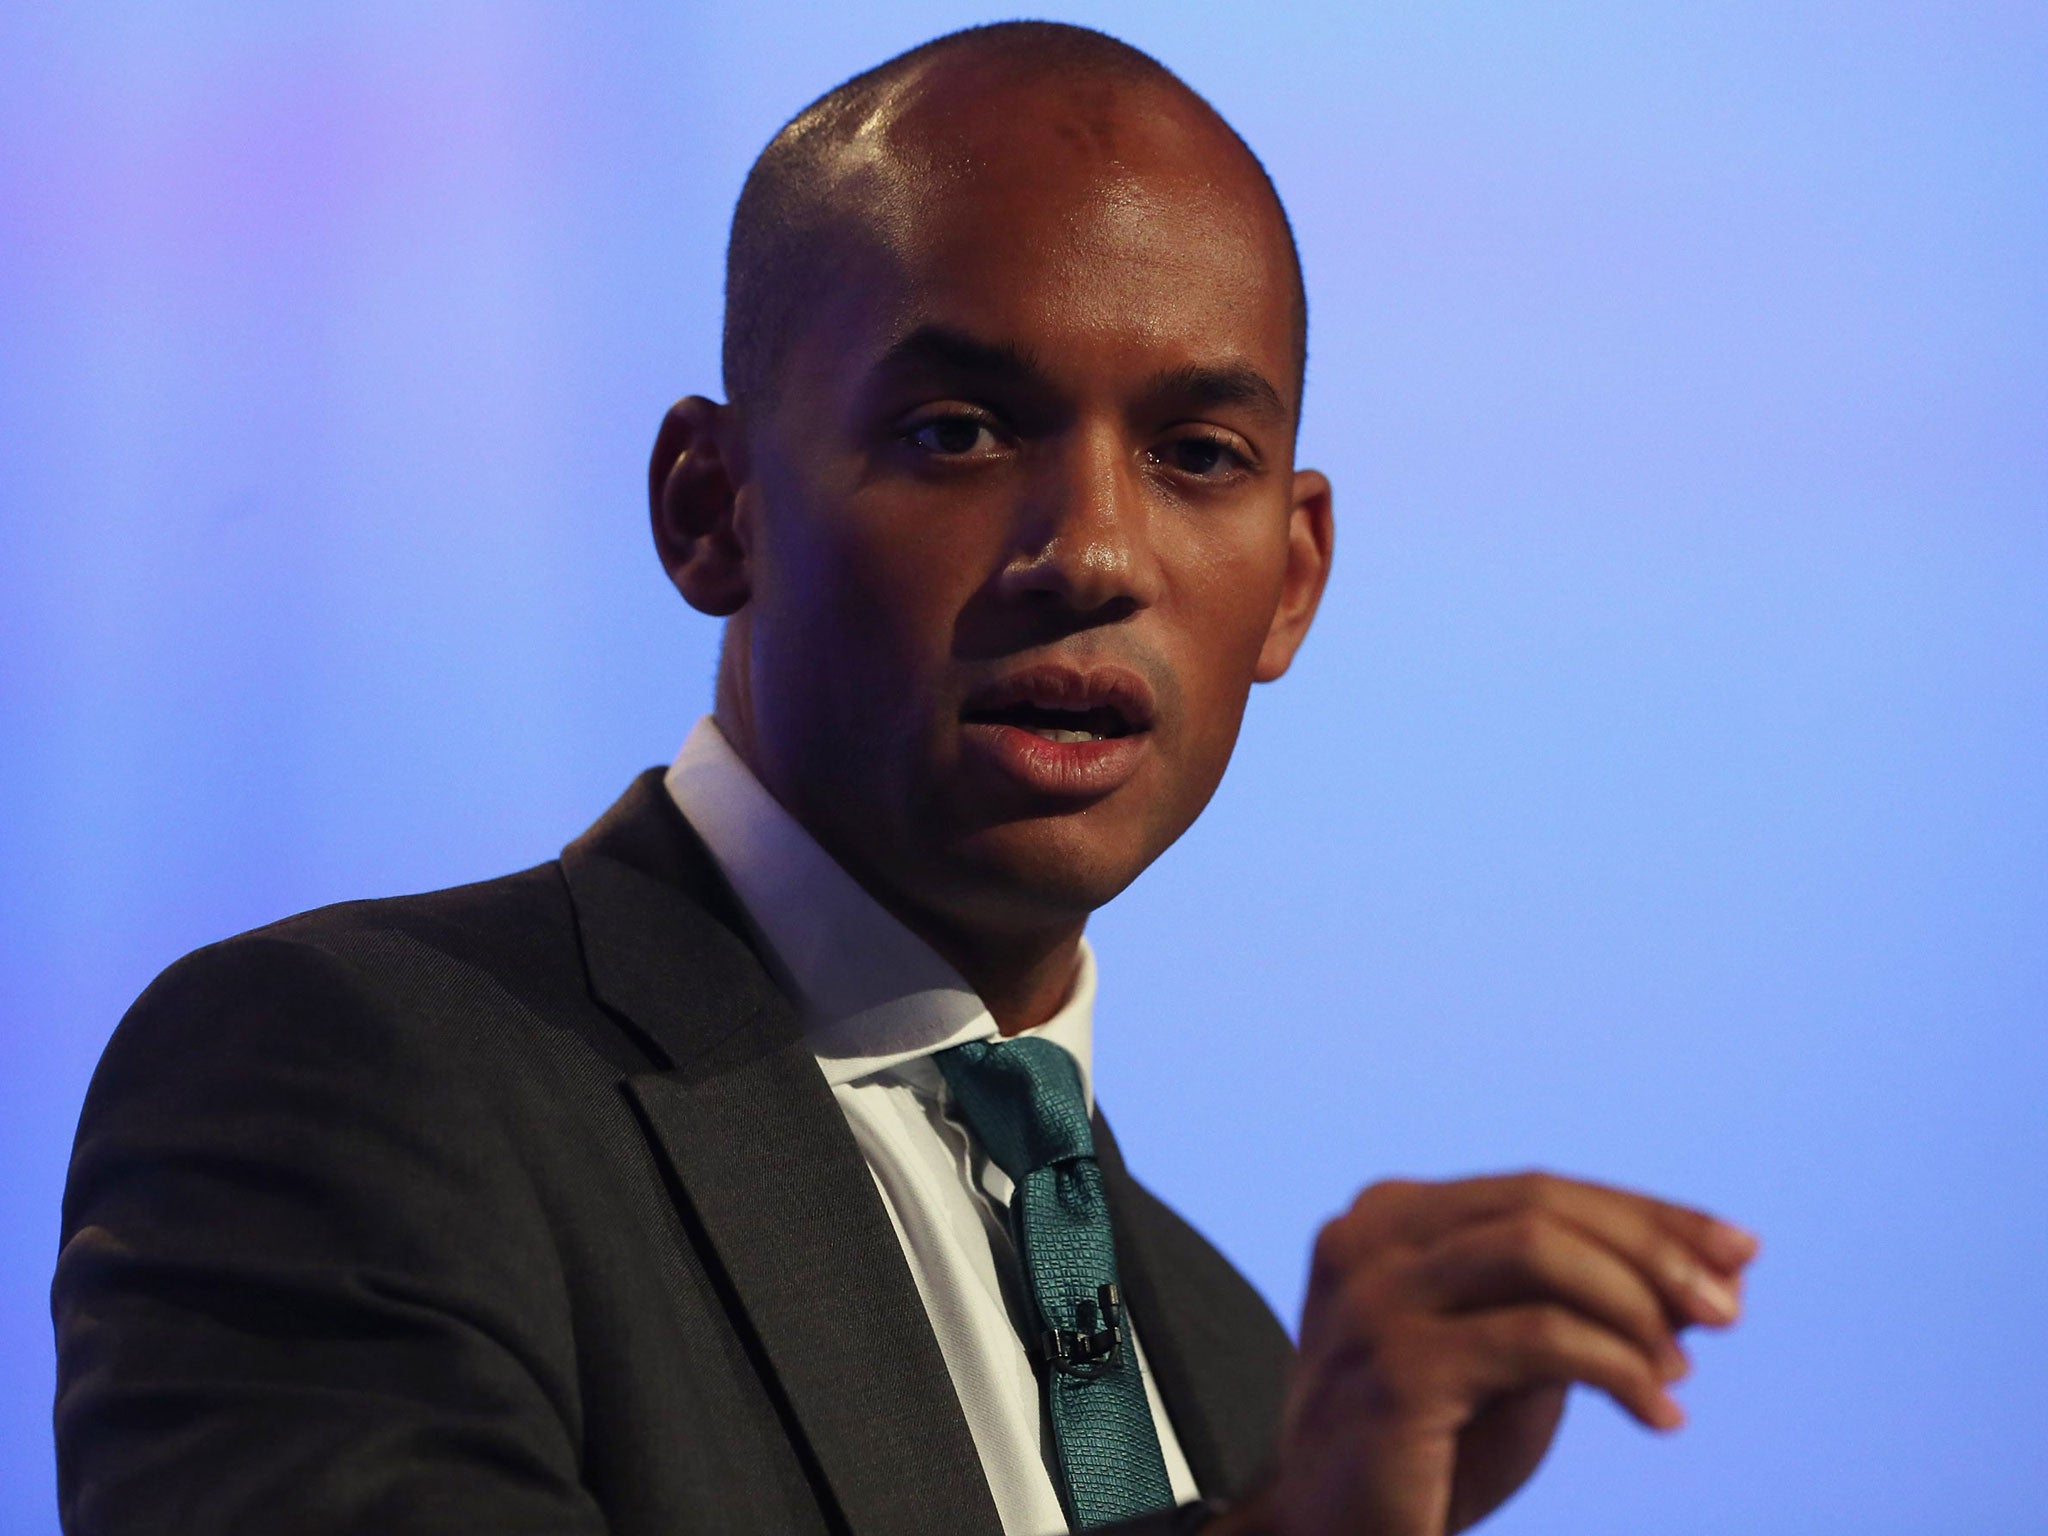 One to watch: Chuka Umunna, even though he divides people